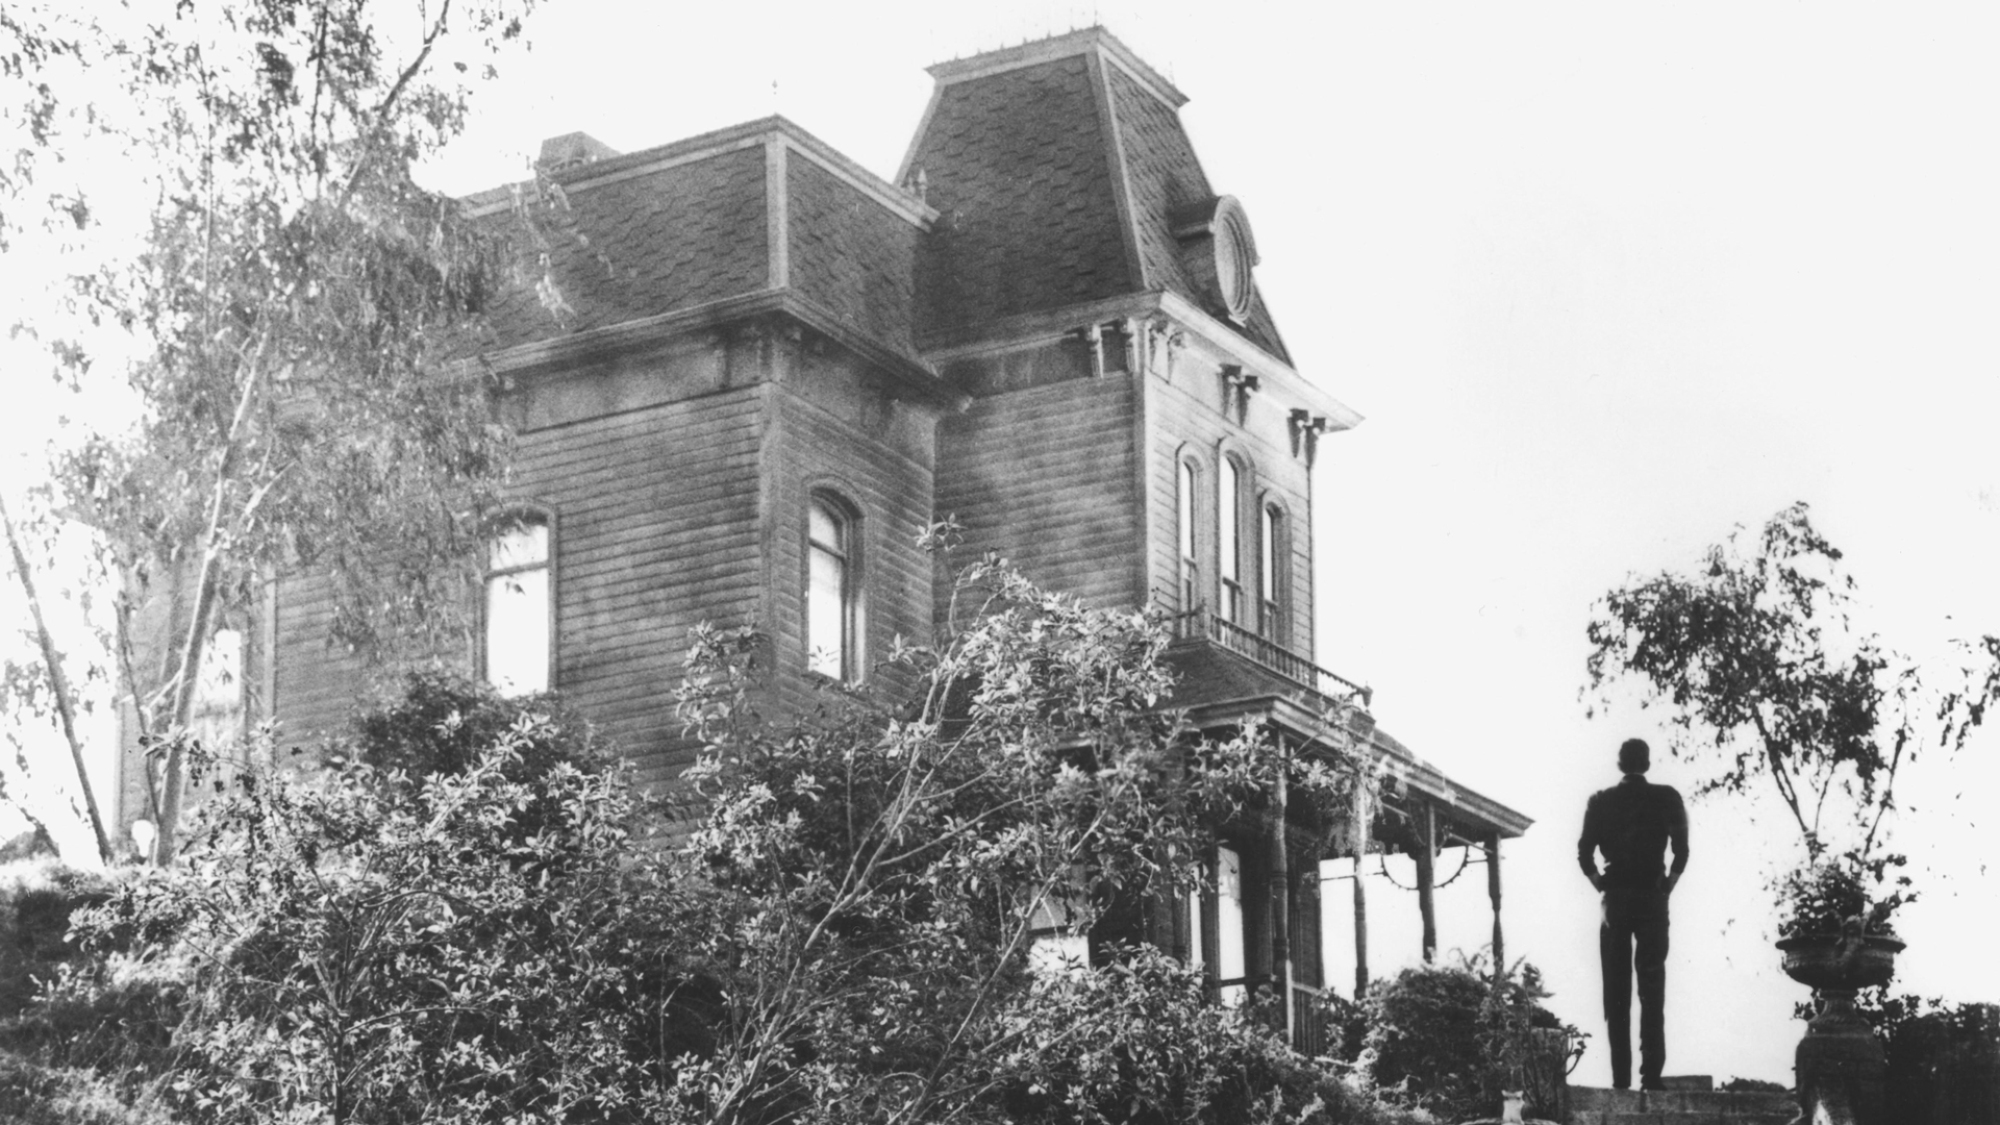 A black and white film still from Alfred Hitchcock's "Psycho" showing an old house on a hill with the silhouette of a man.